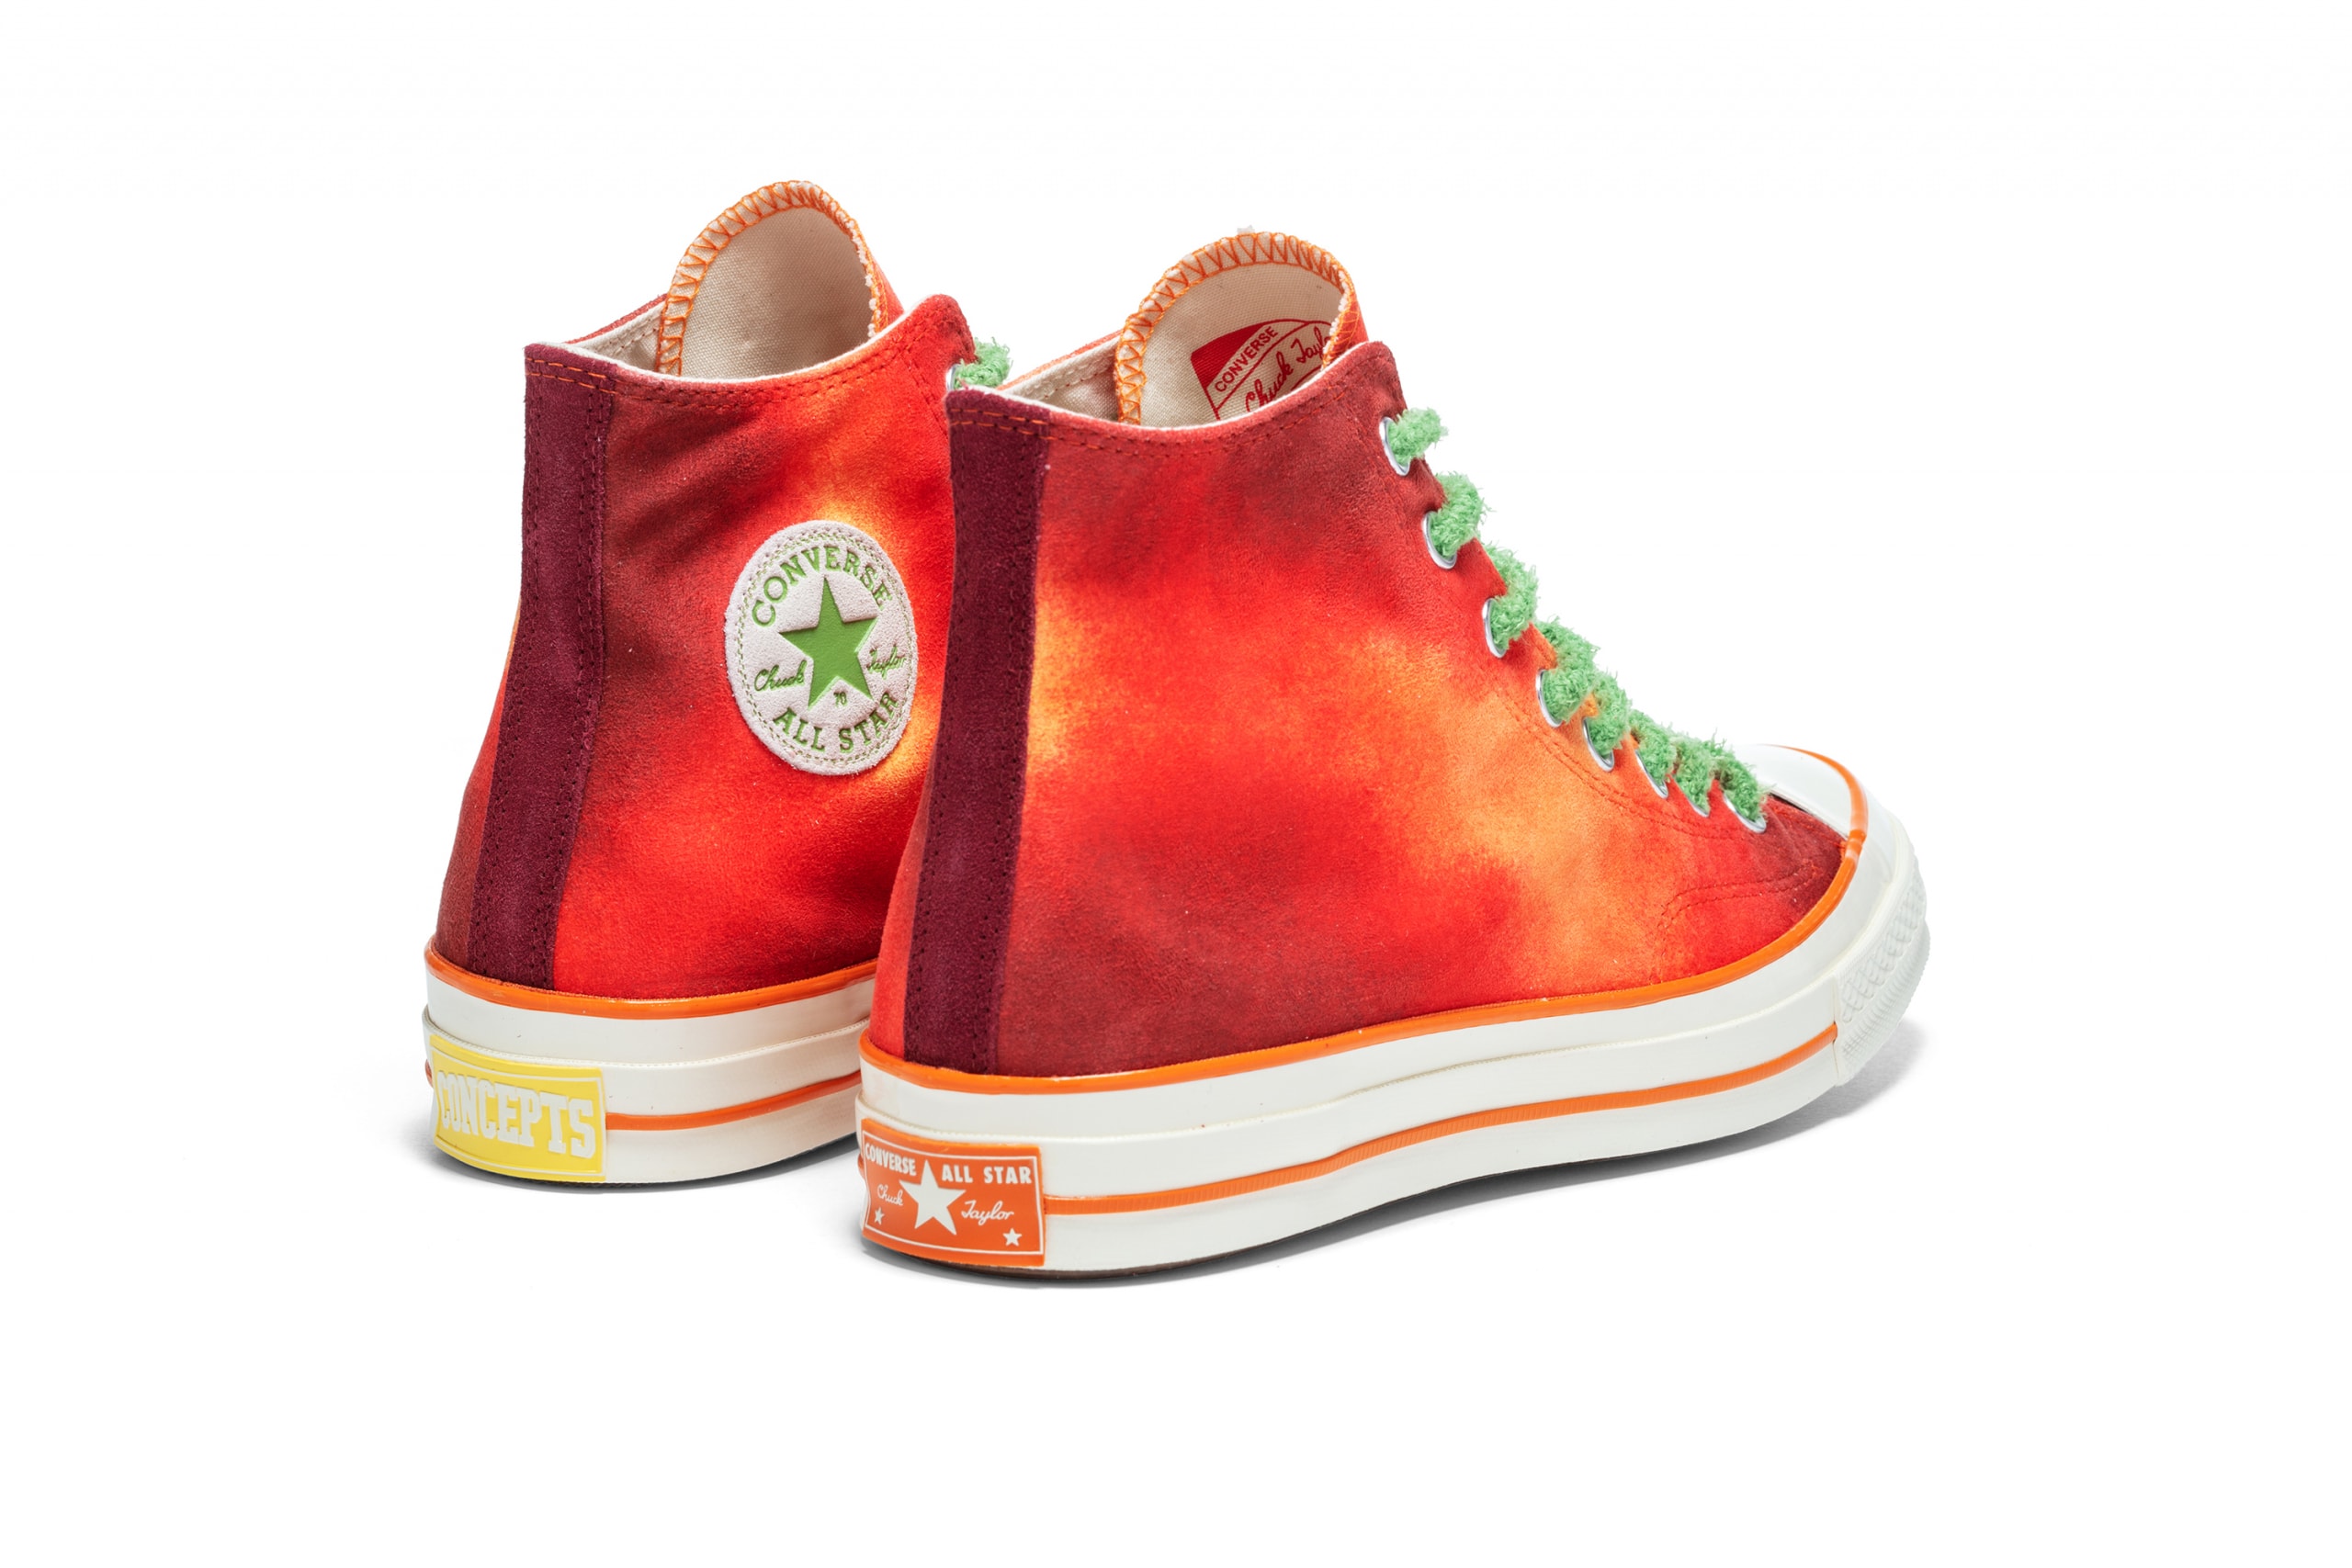 Converse 携手 Concepts 推出「Southern Flames」联名系列